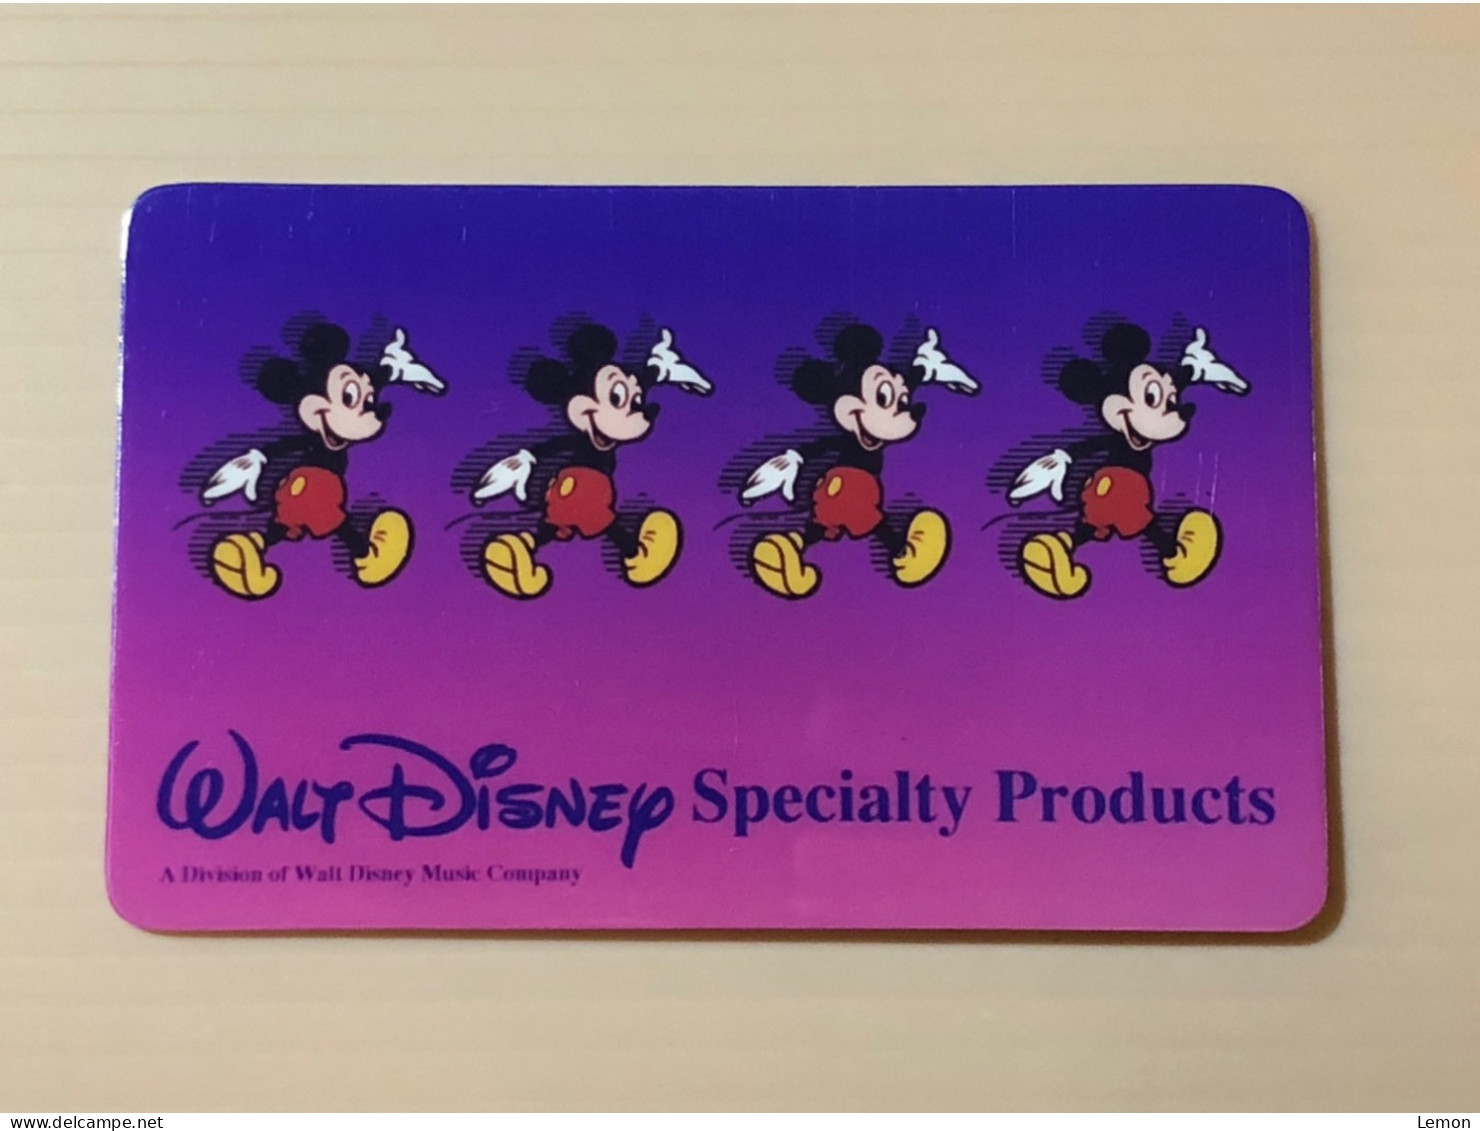 Mint USA UNITED STATES America Prepaid Telecard Phonecard, WALT DISNEY Specialty Product SAMPLE CARD, Set Of 1 Mint Card - Collections